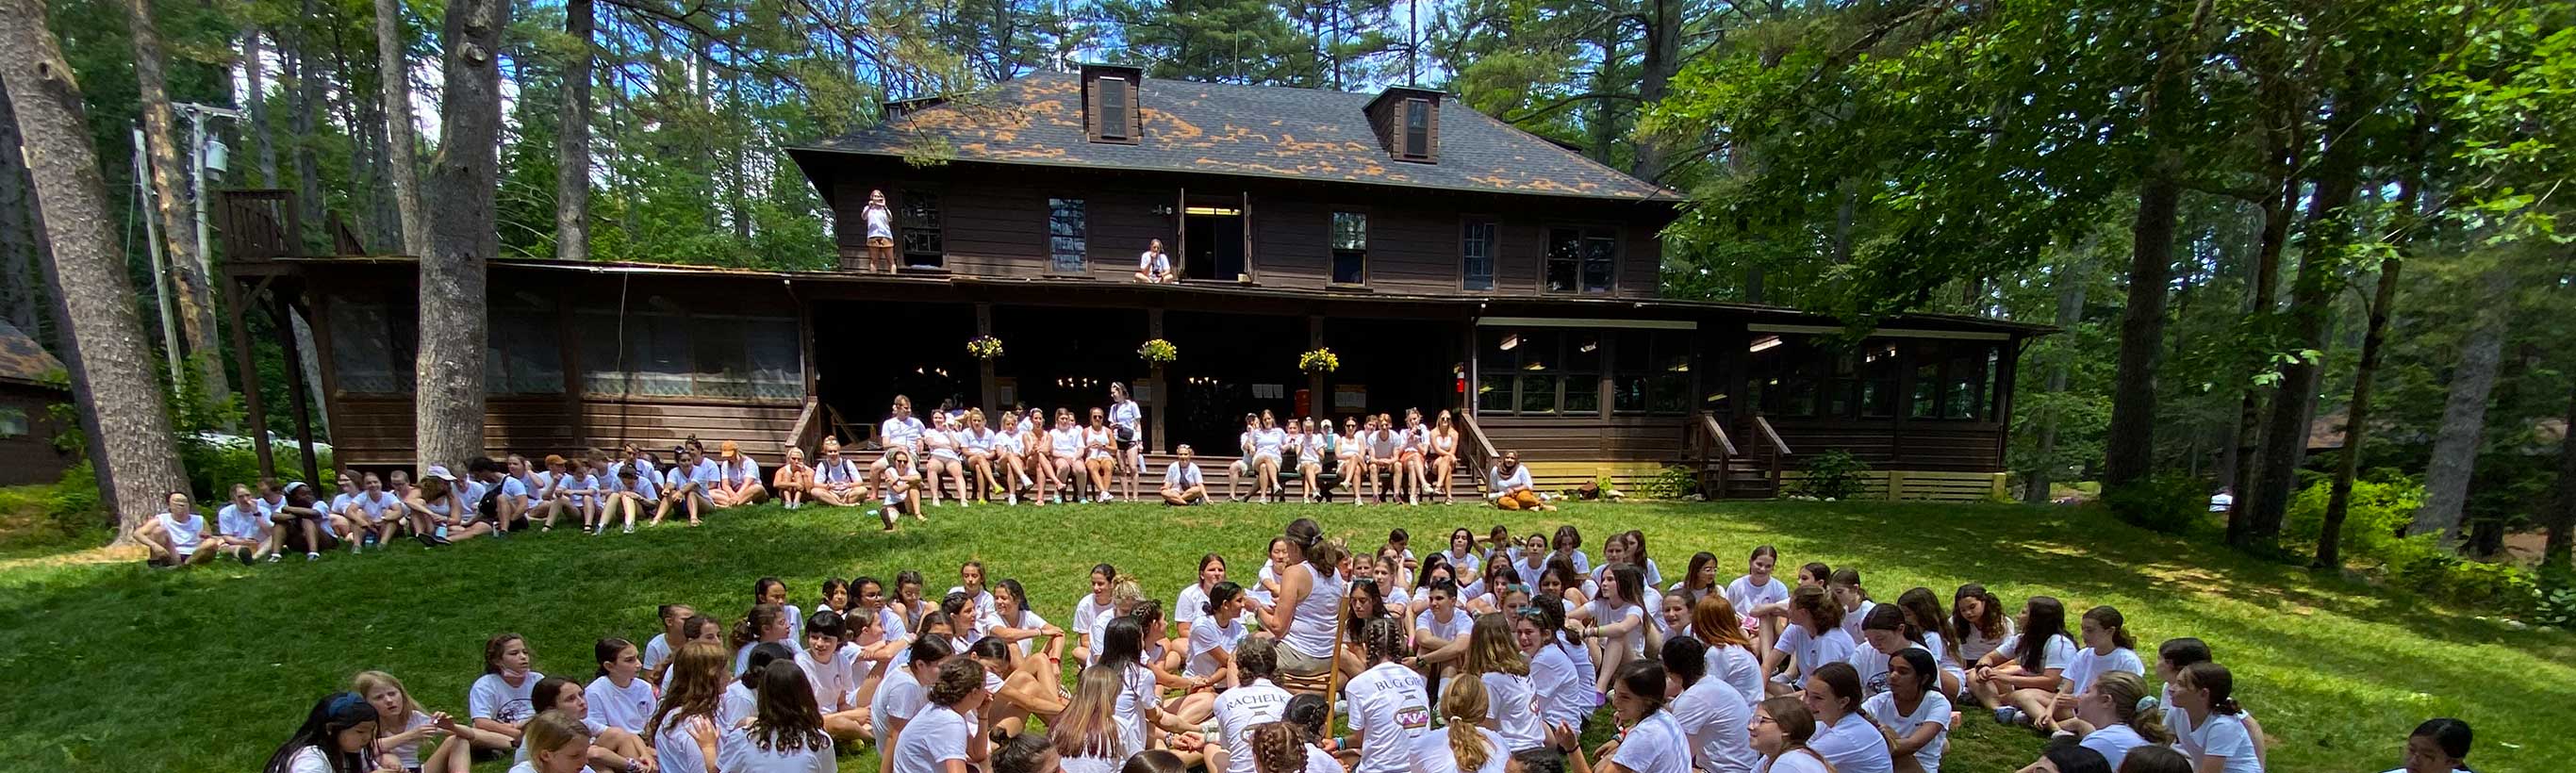 The Camp Walden lodge with a crowd of girls in front.